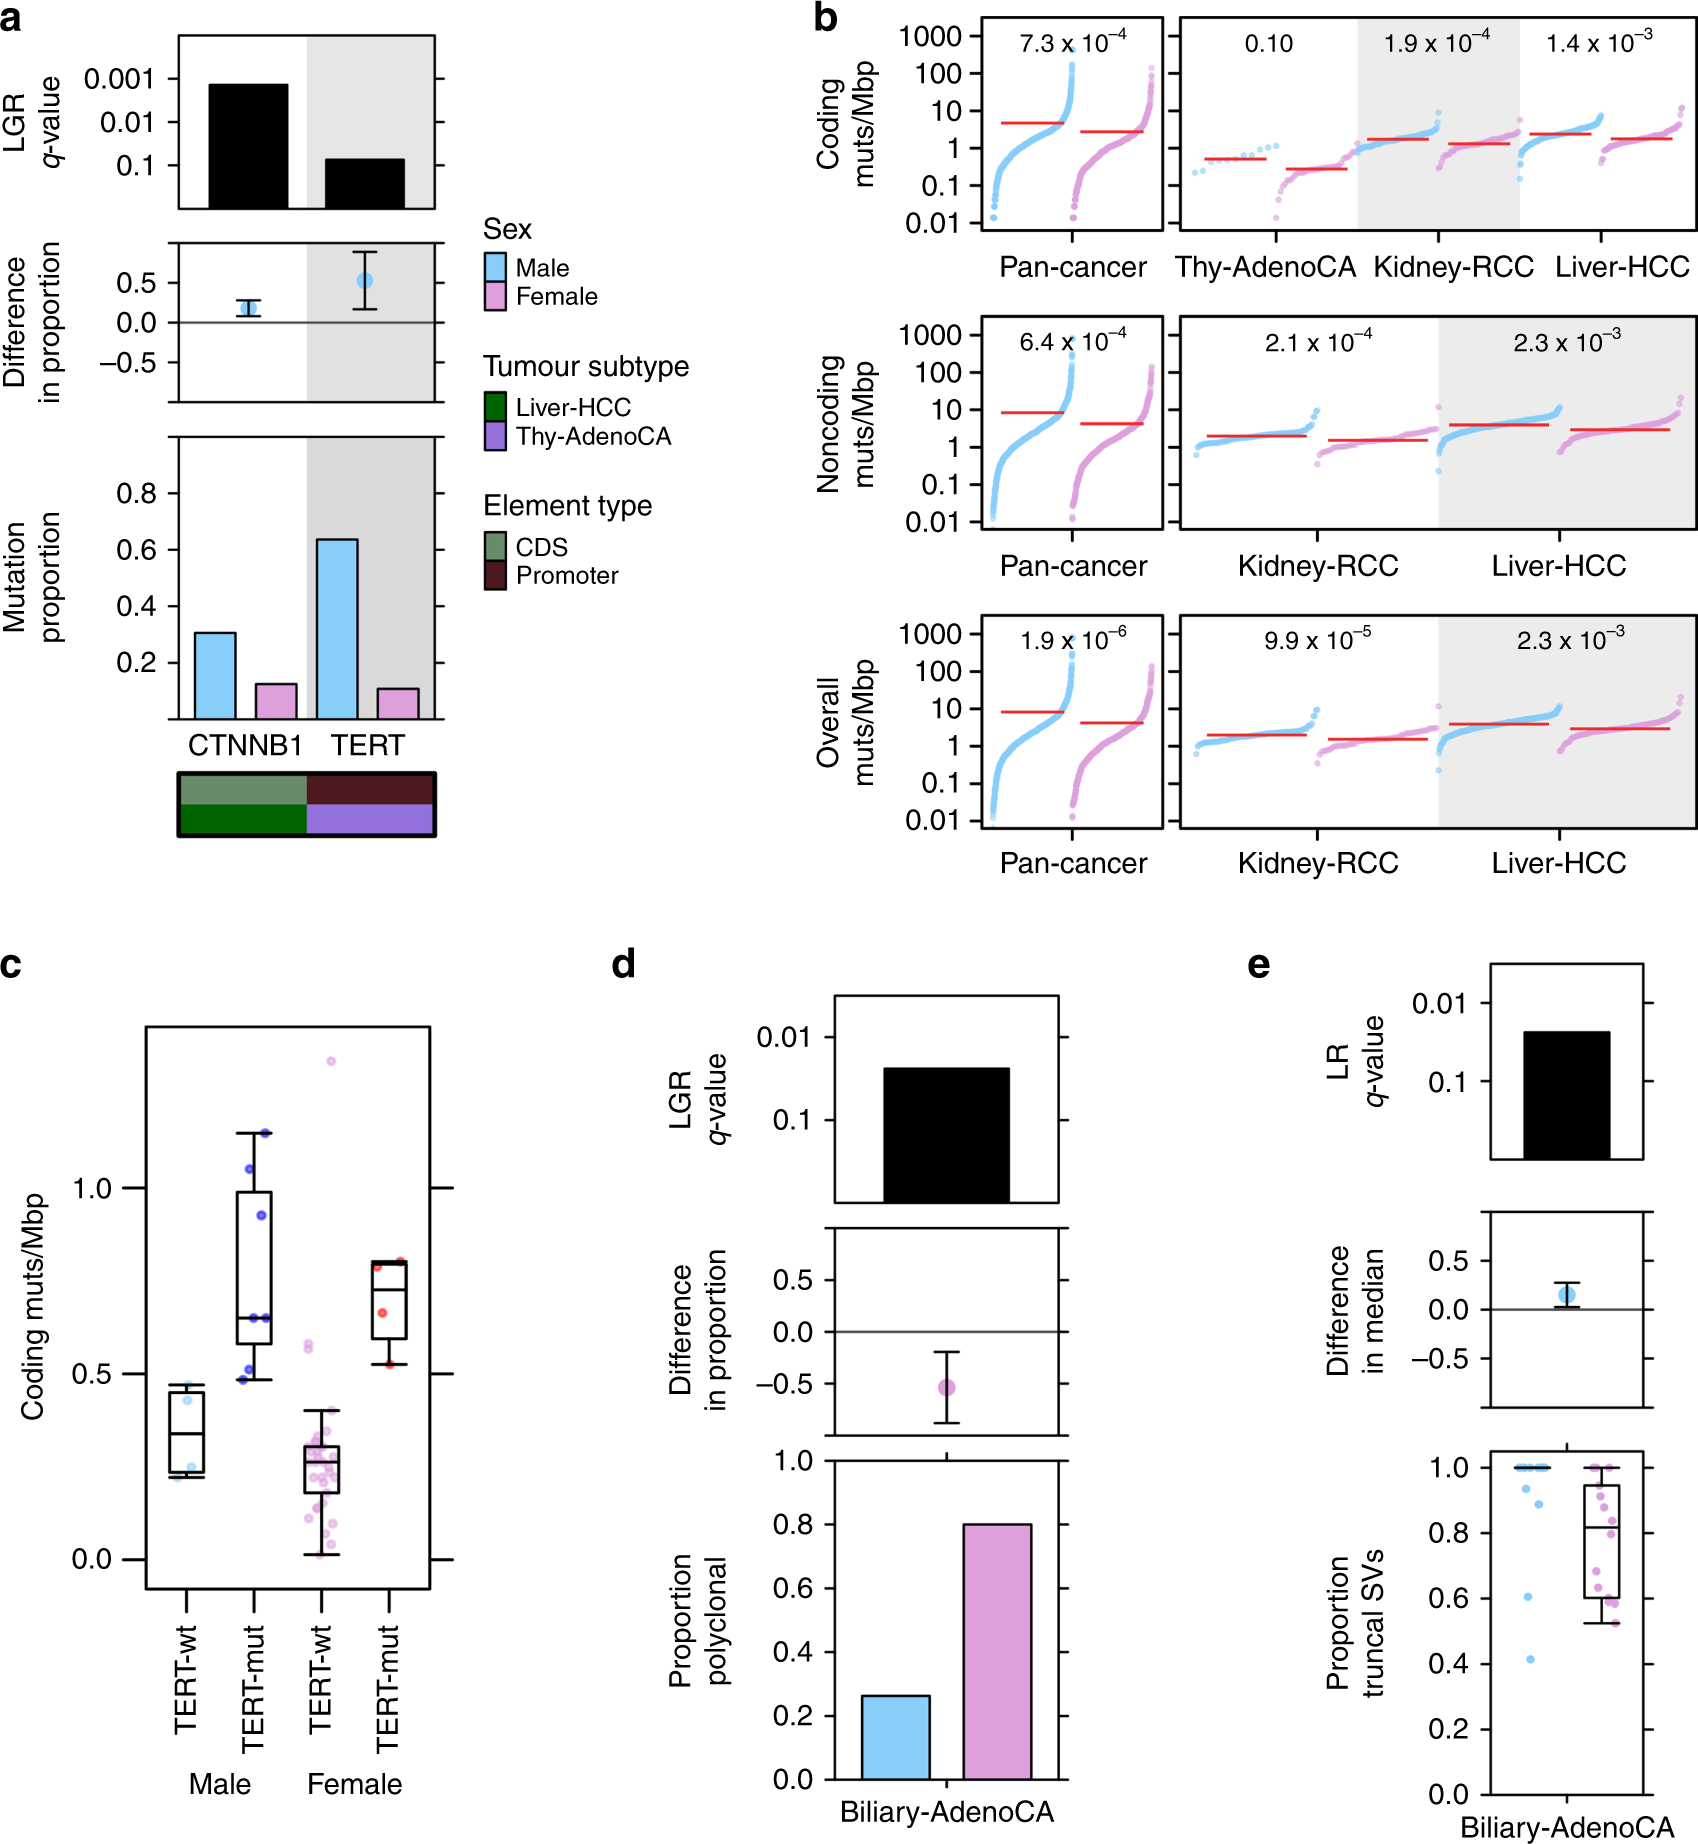 Sex differences in oncogenic mutational processes | Nature Communications